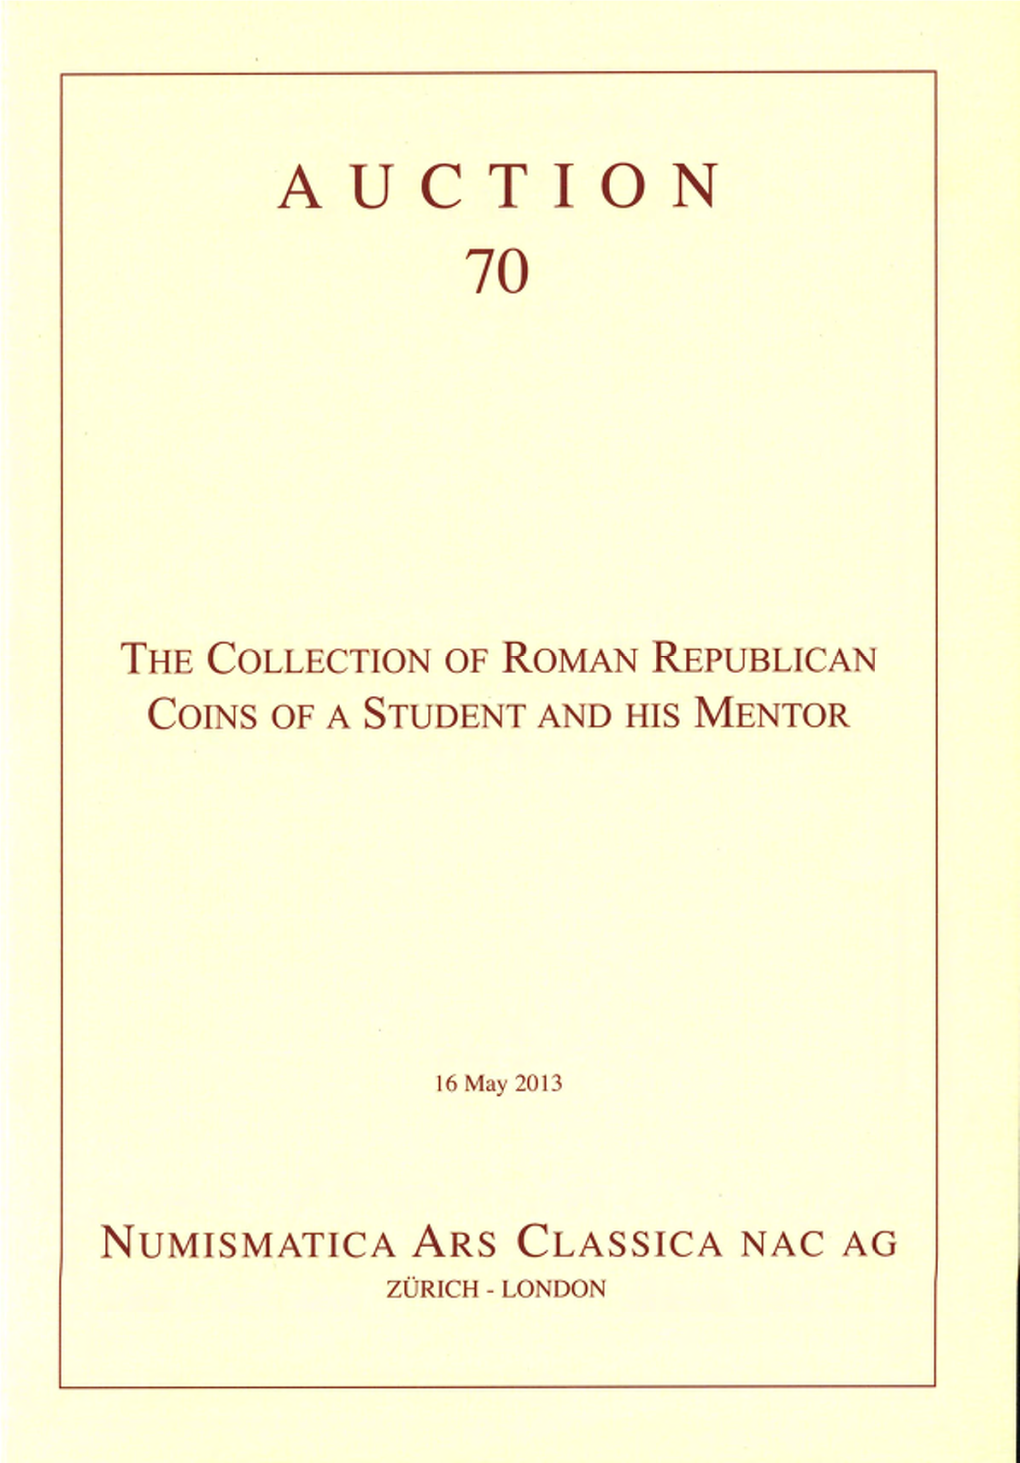 The Collection of Roman Republican Coins of a Student and His Mentor